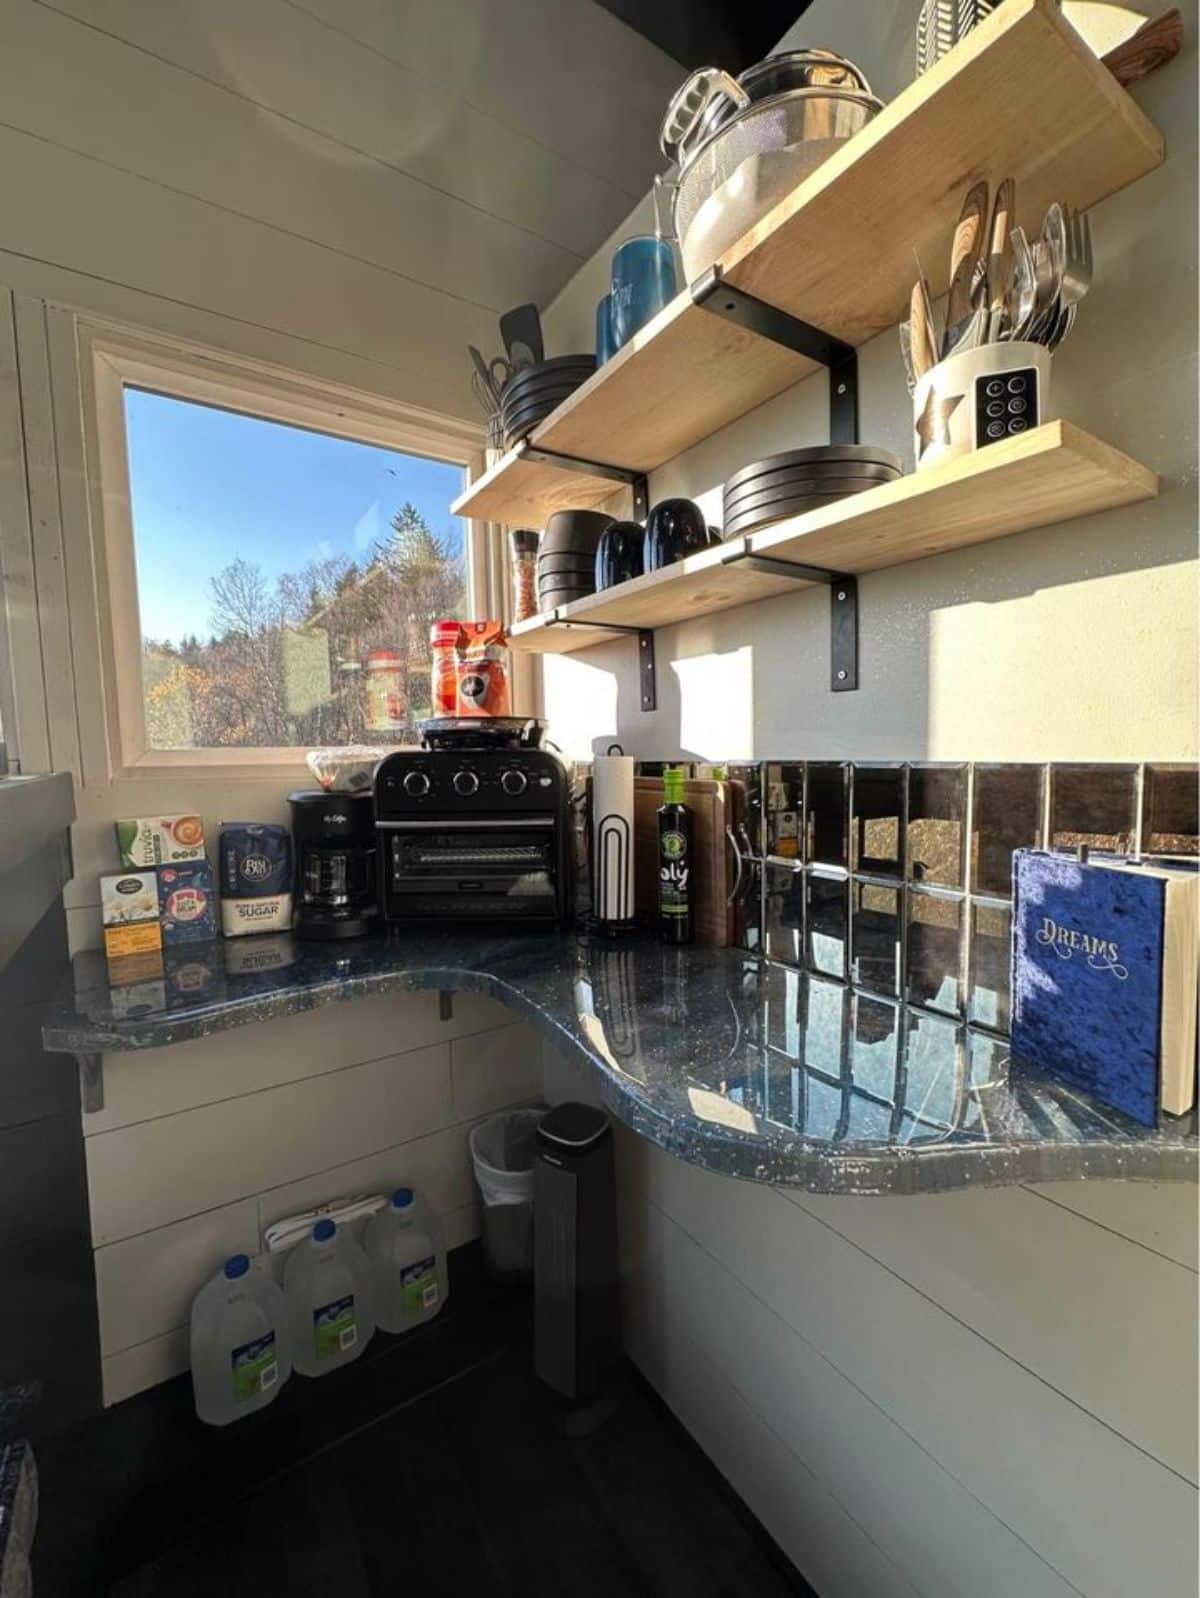 compact kitchen area but has everything